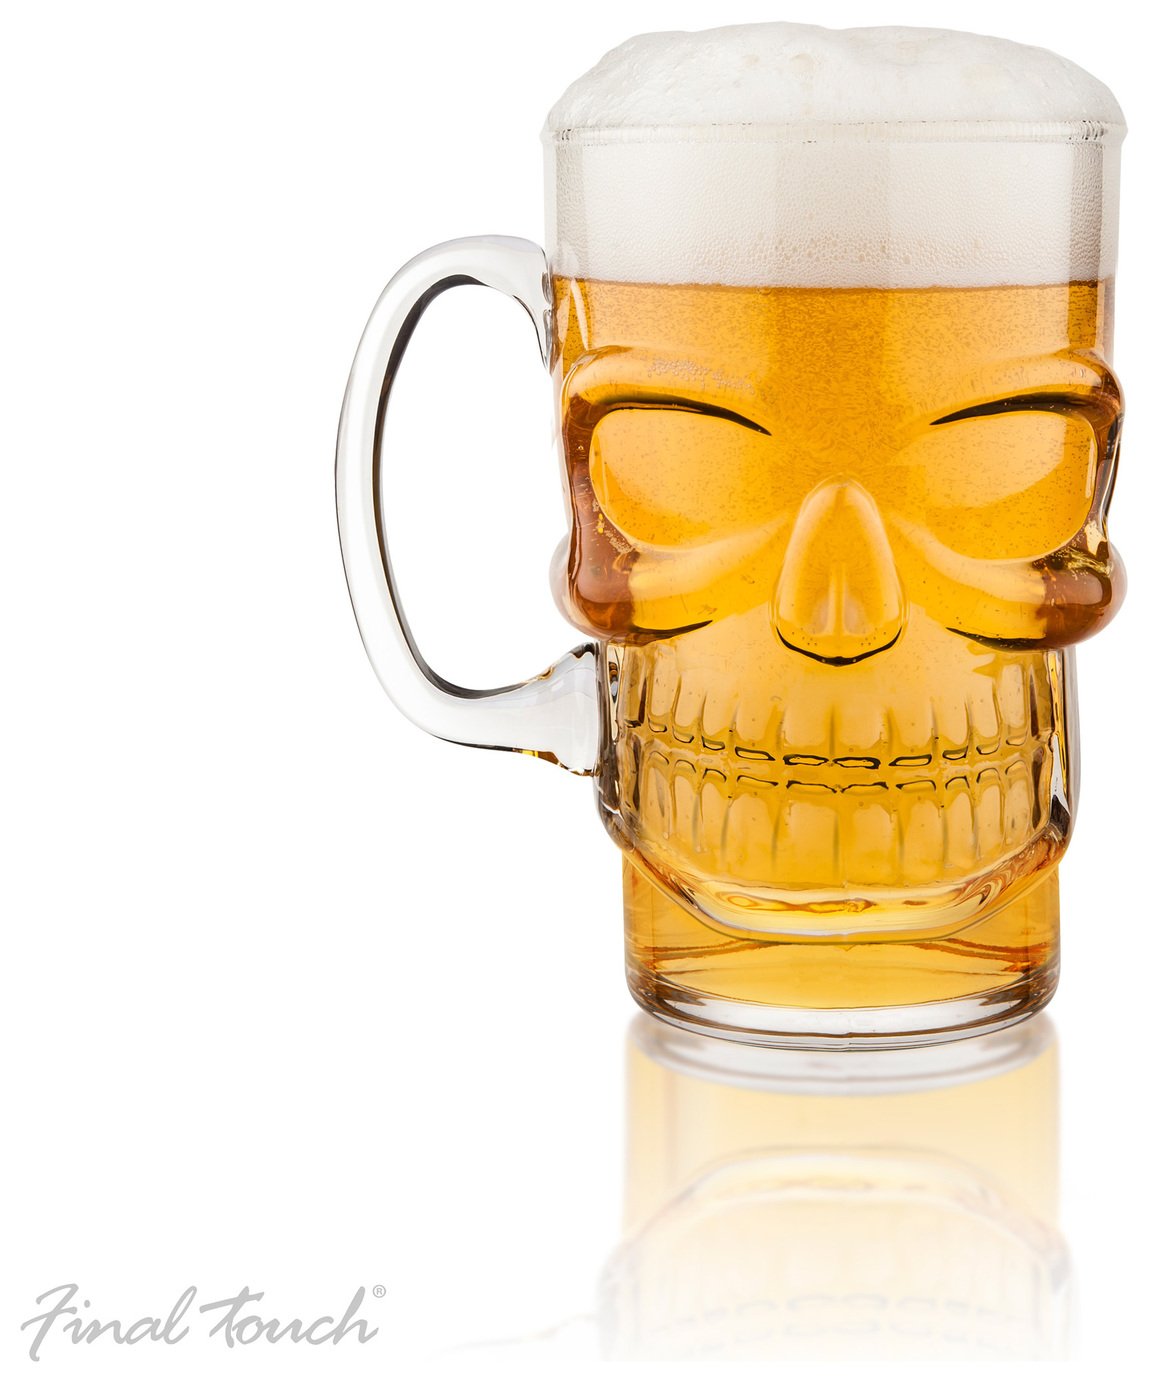 Final Touch Skull Beer Mug review